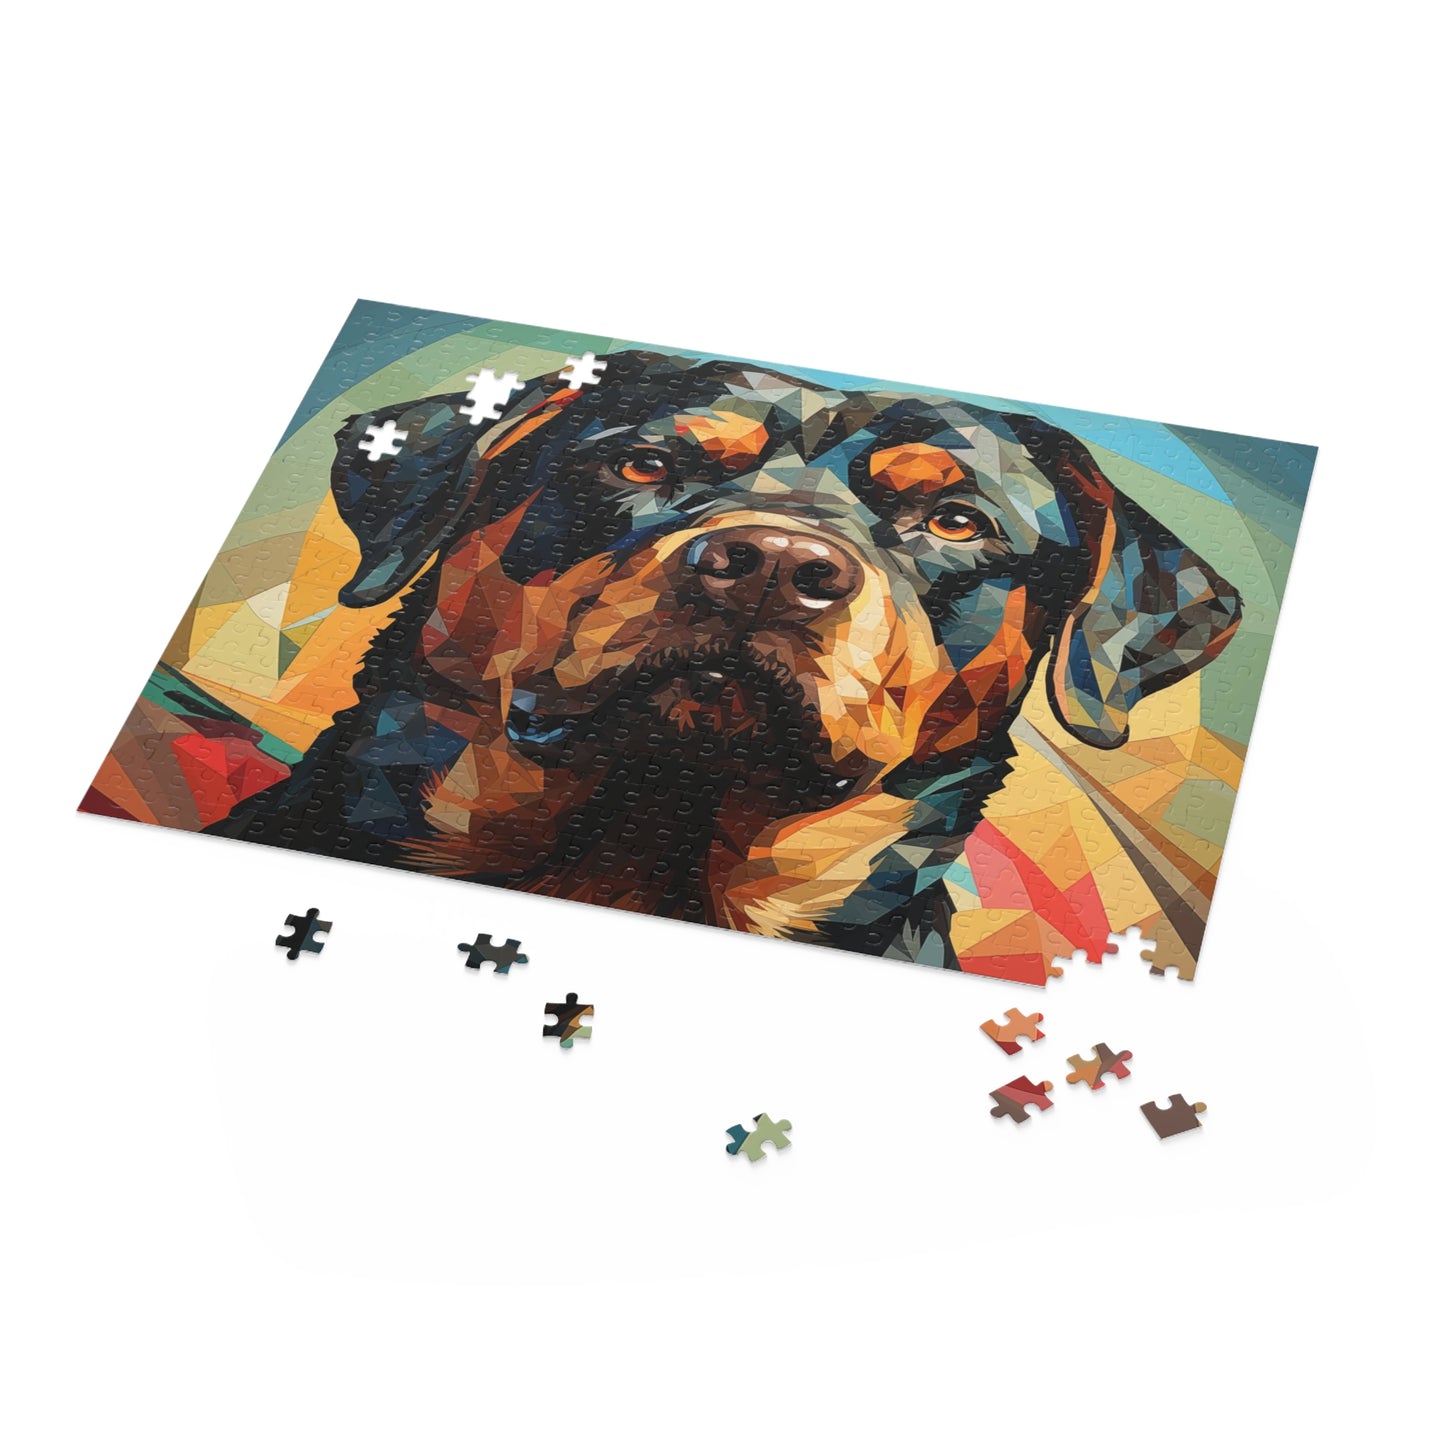 Rottweiler Dog Abstract Watercolor Jigsaw Puzzle Adult Birthday Business Jigsaw Puzzle Gift for Him Funny Humorous Indoor Outdoor Game Gift For Her Online-5